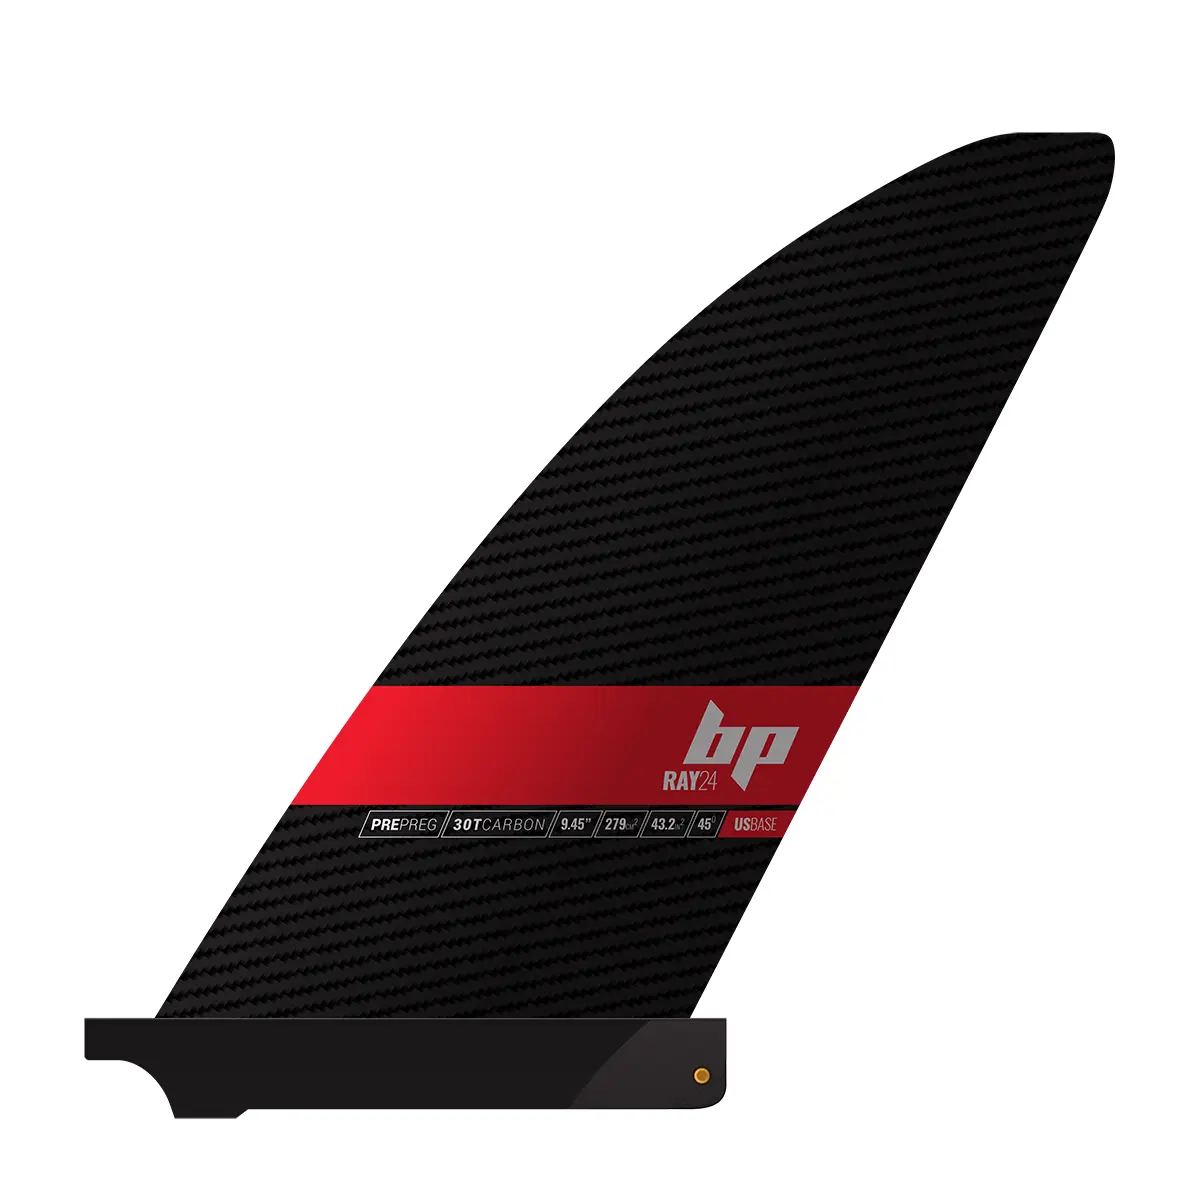 Black Project SUP- Fin RAY v2 – US base